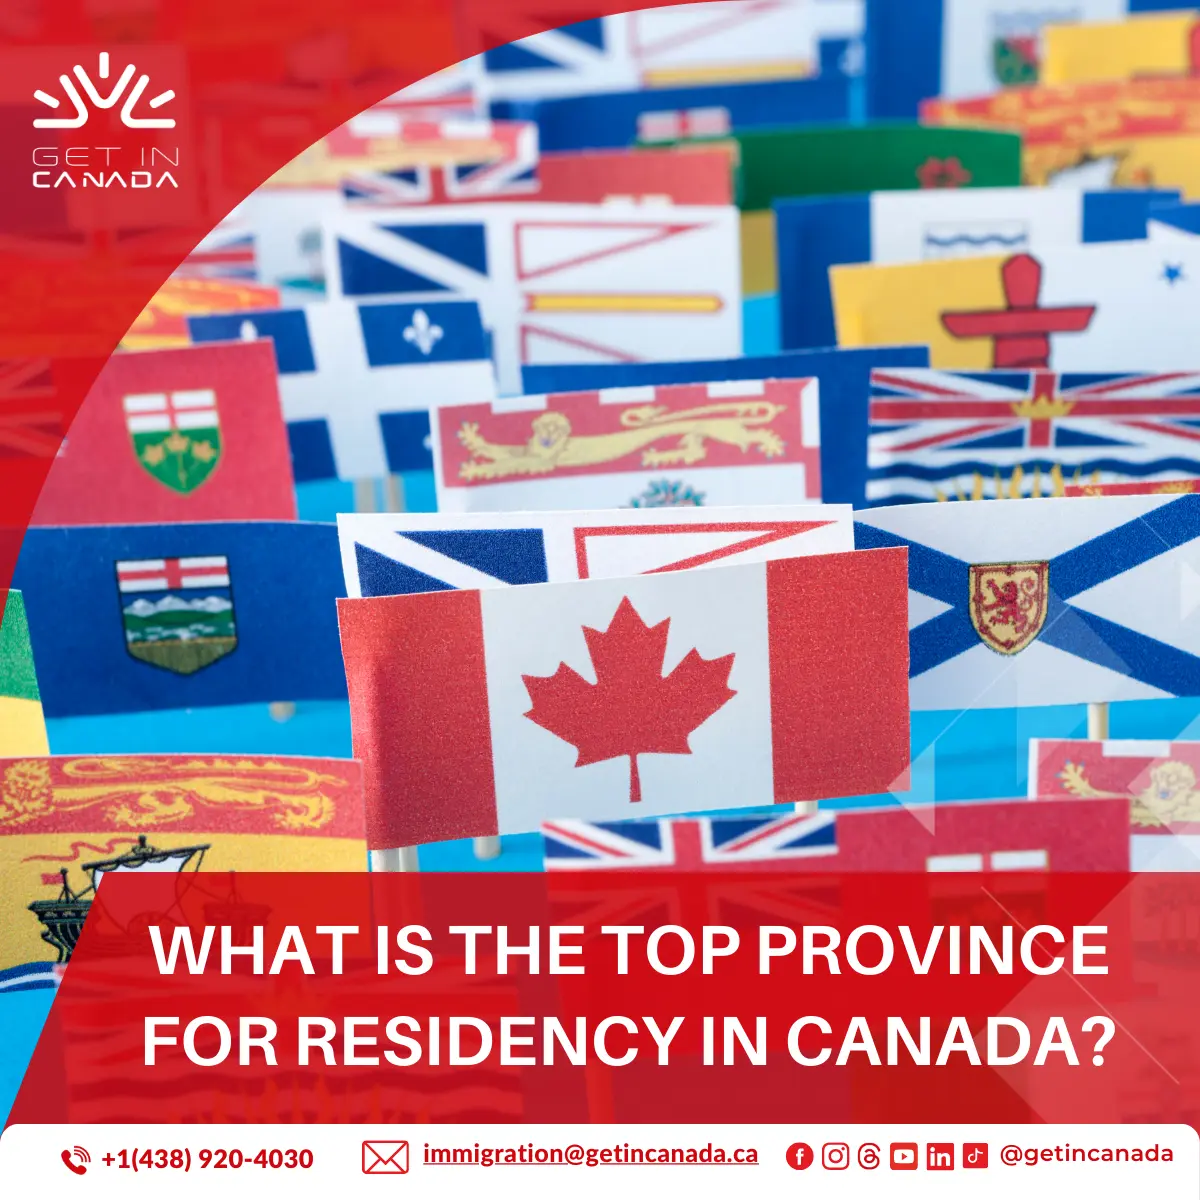 What is the top province for residency in Canada?